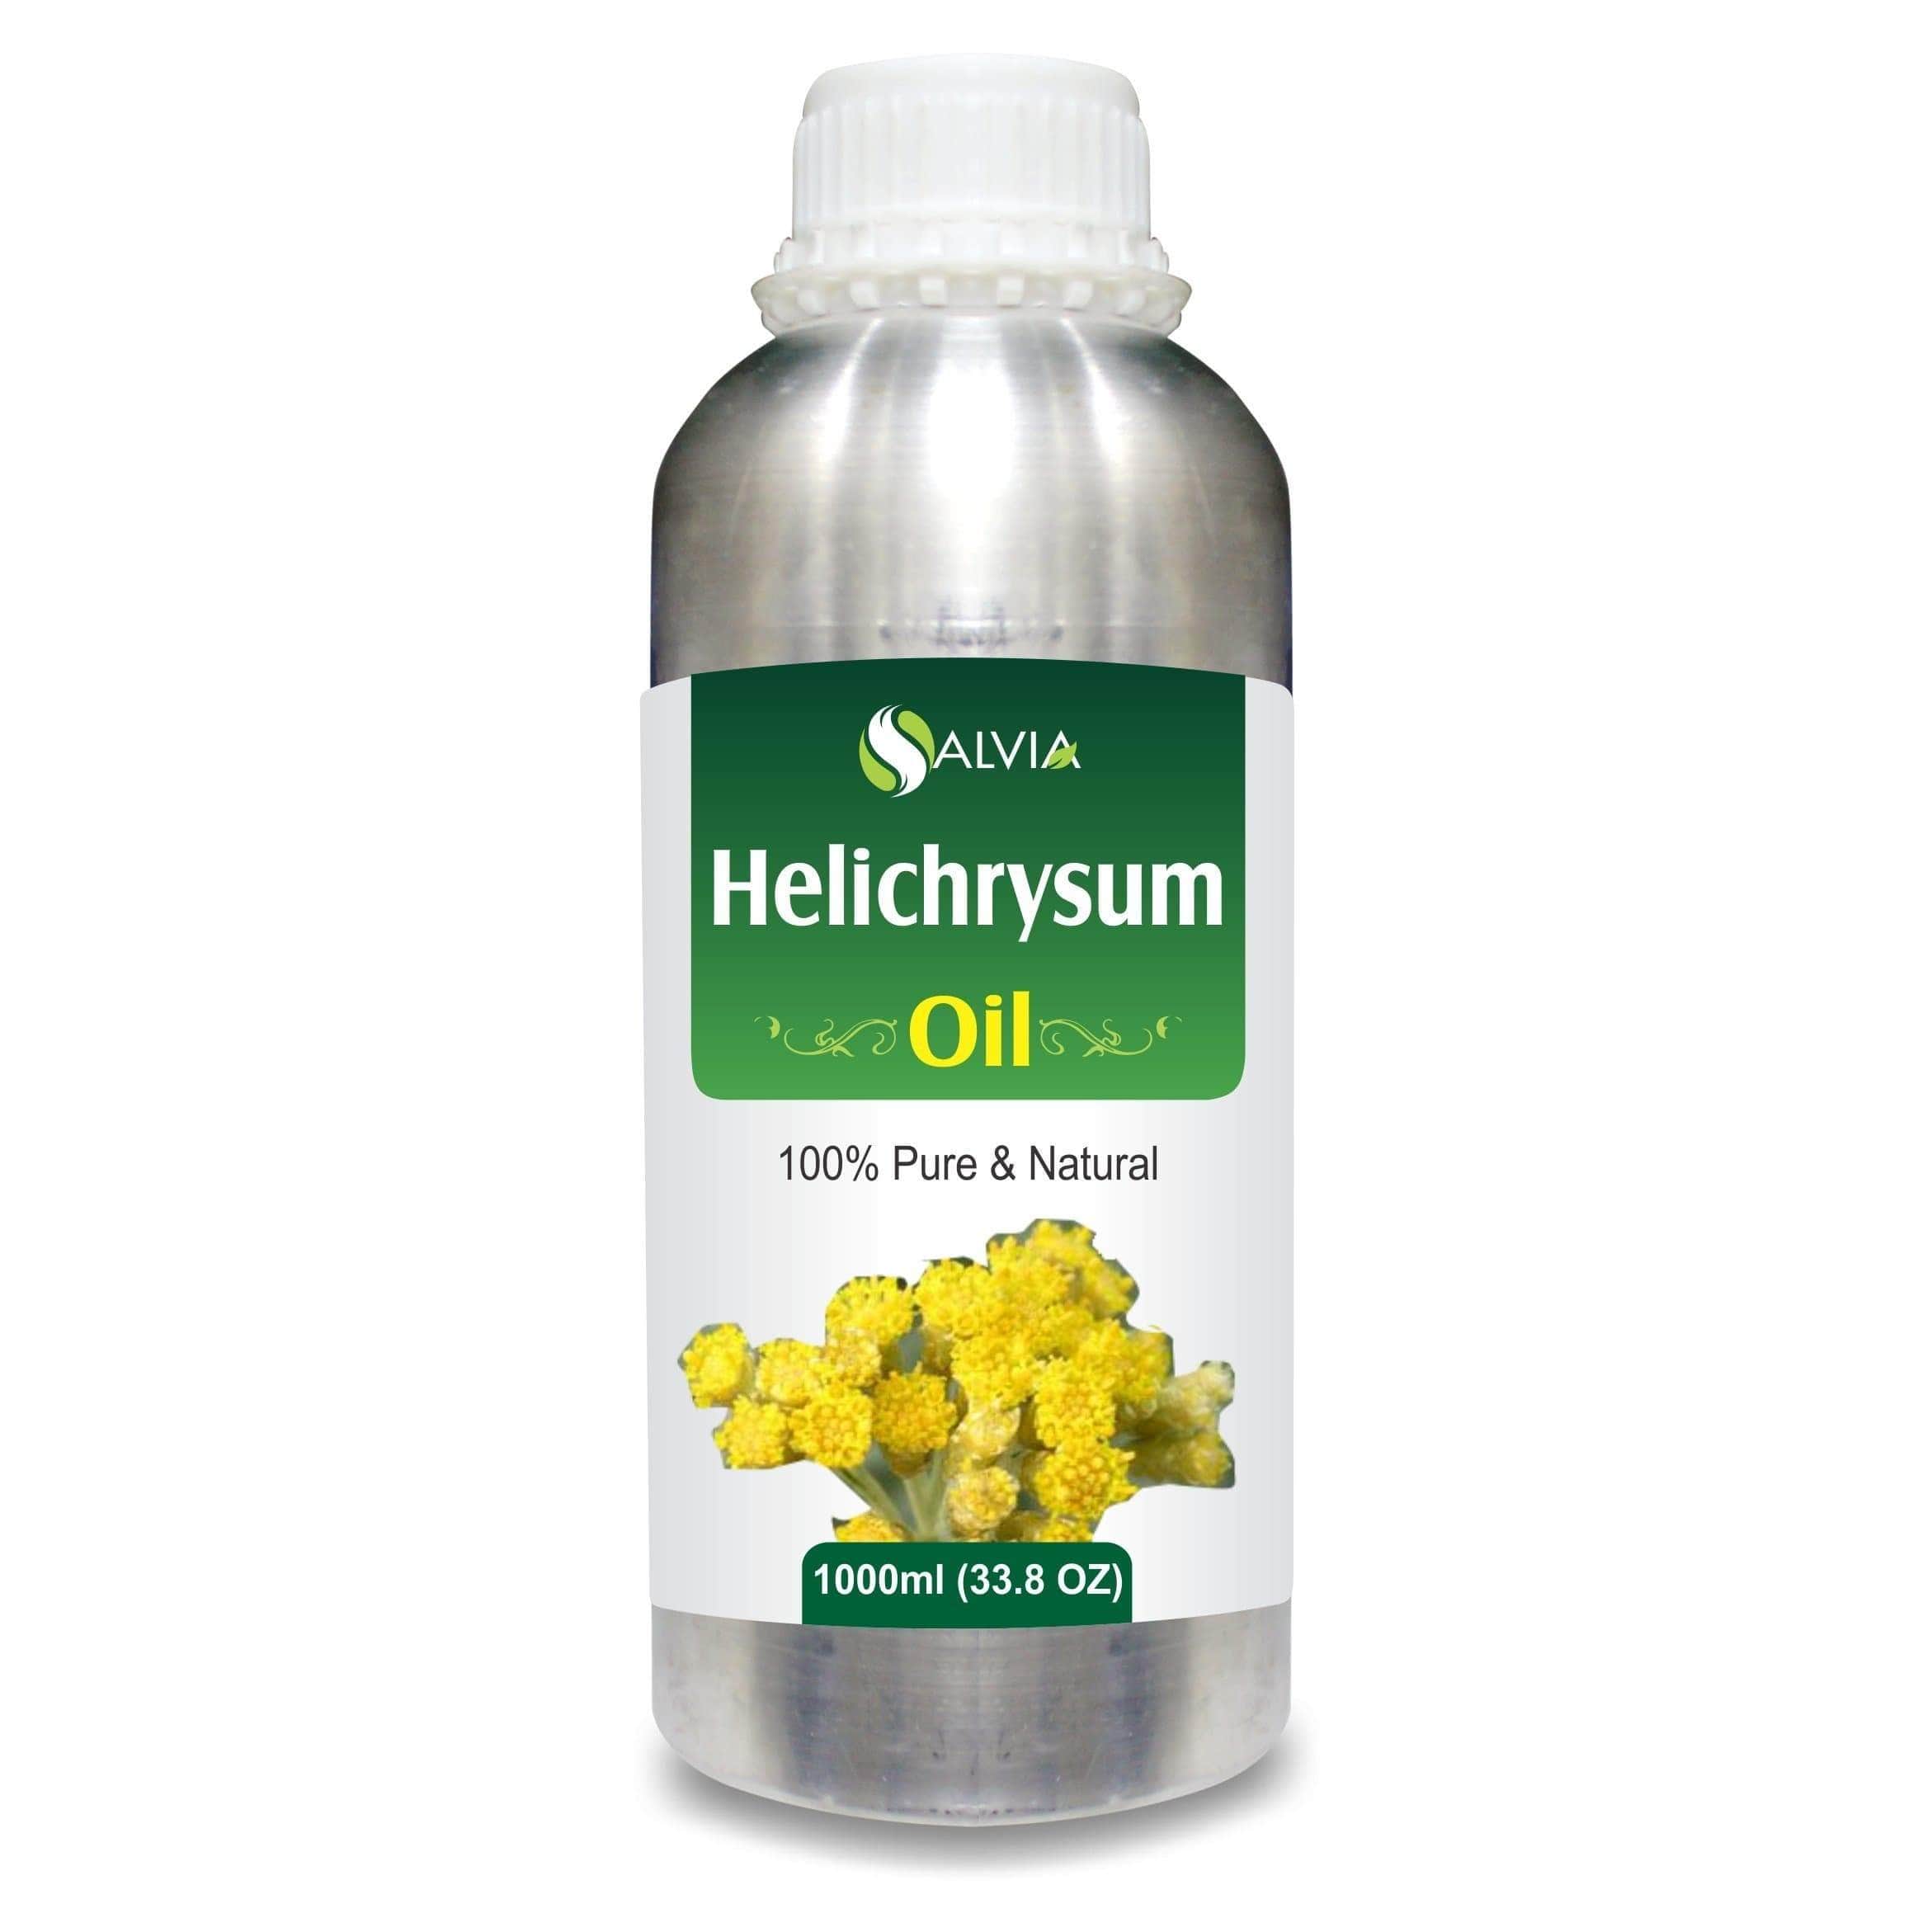 helichrysum oil for pain